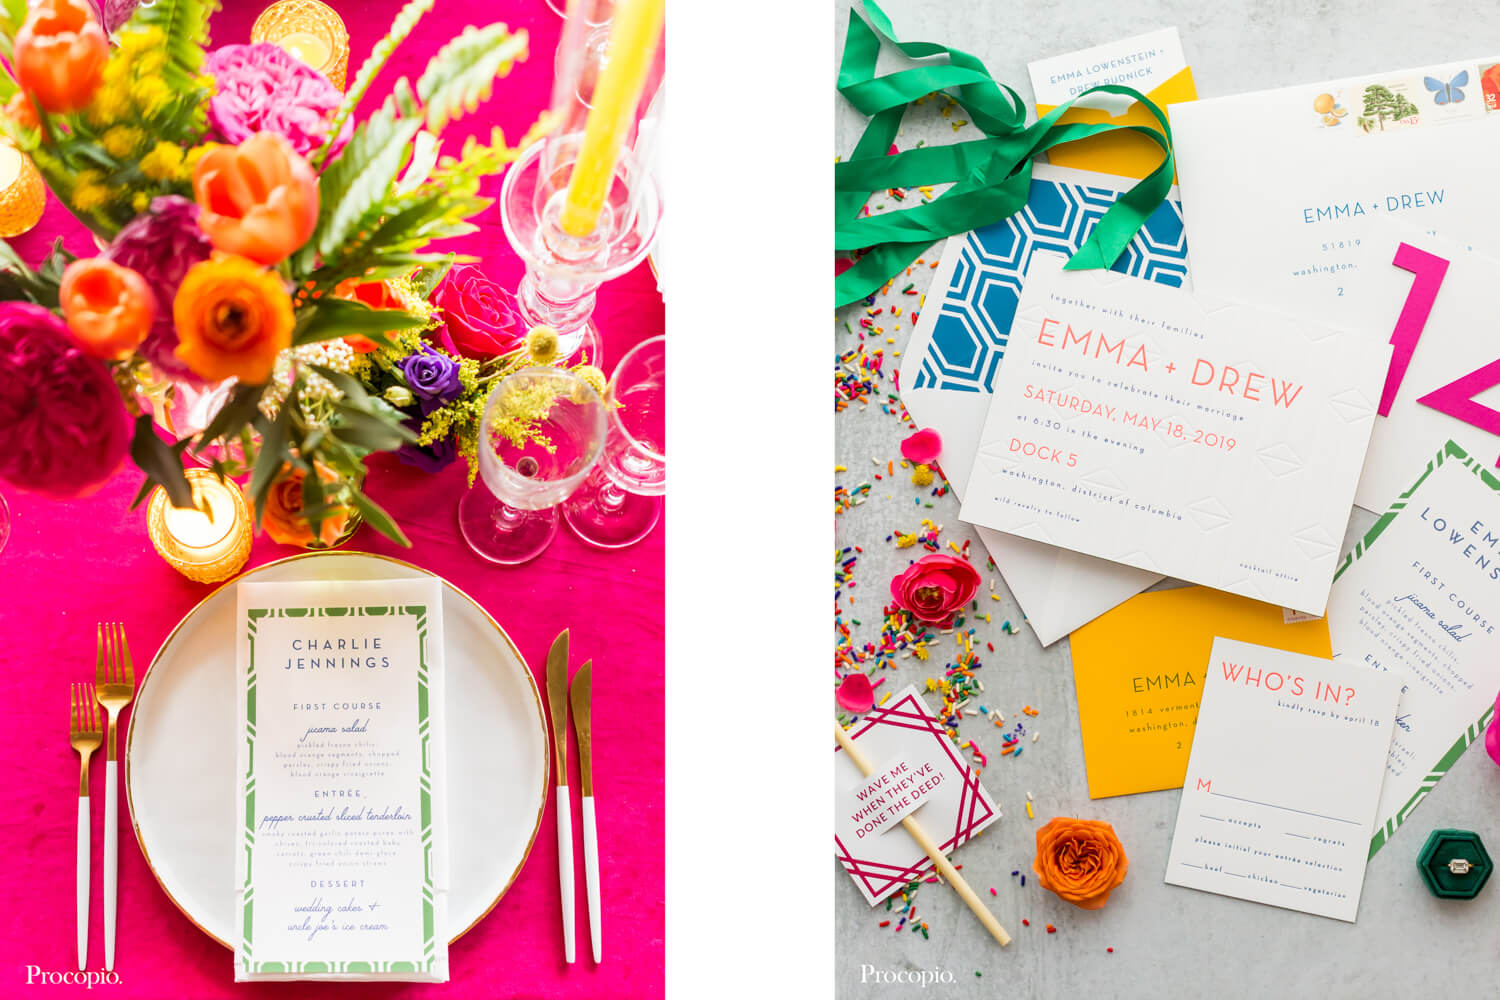 Invitations and place setting from A.Dominick Events - best Washington DC wedding planner